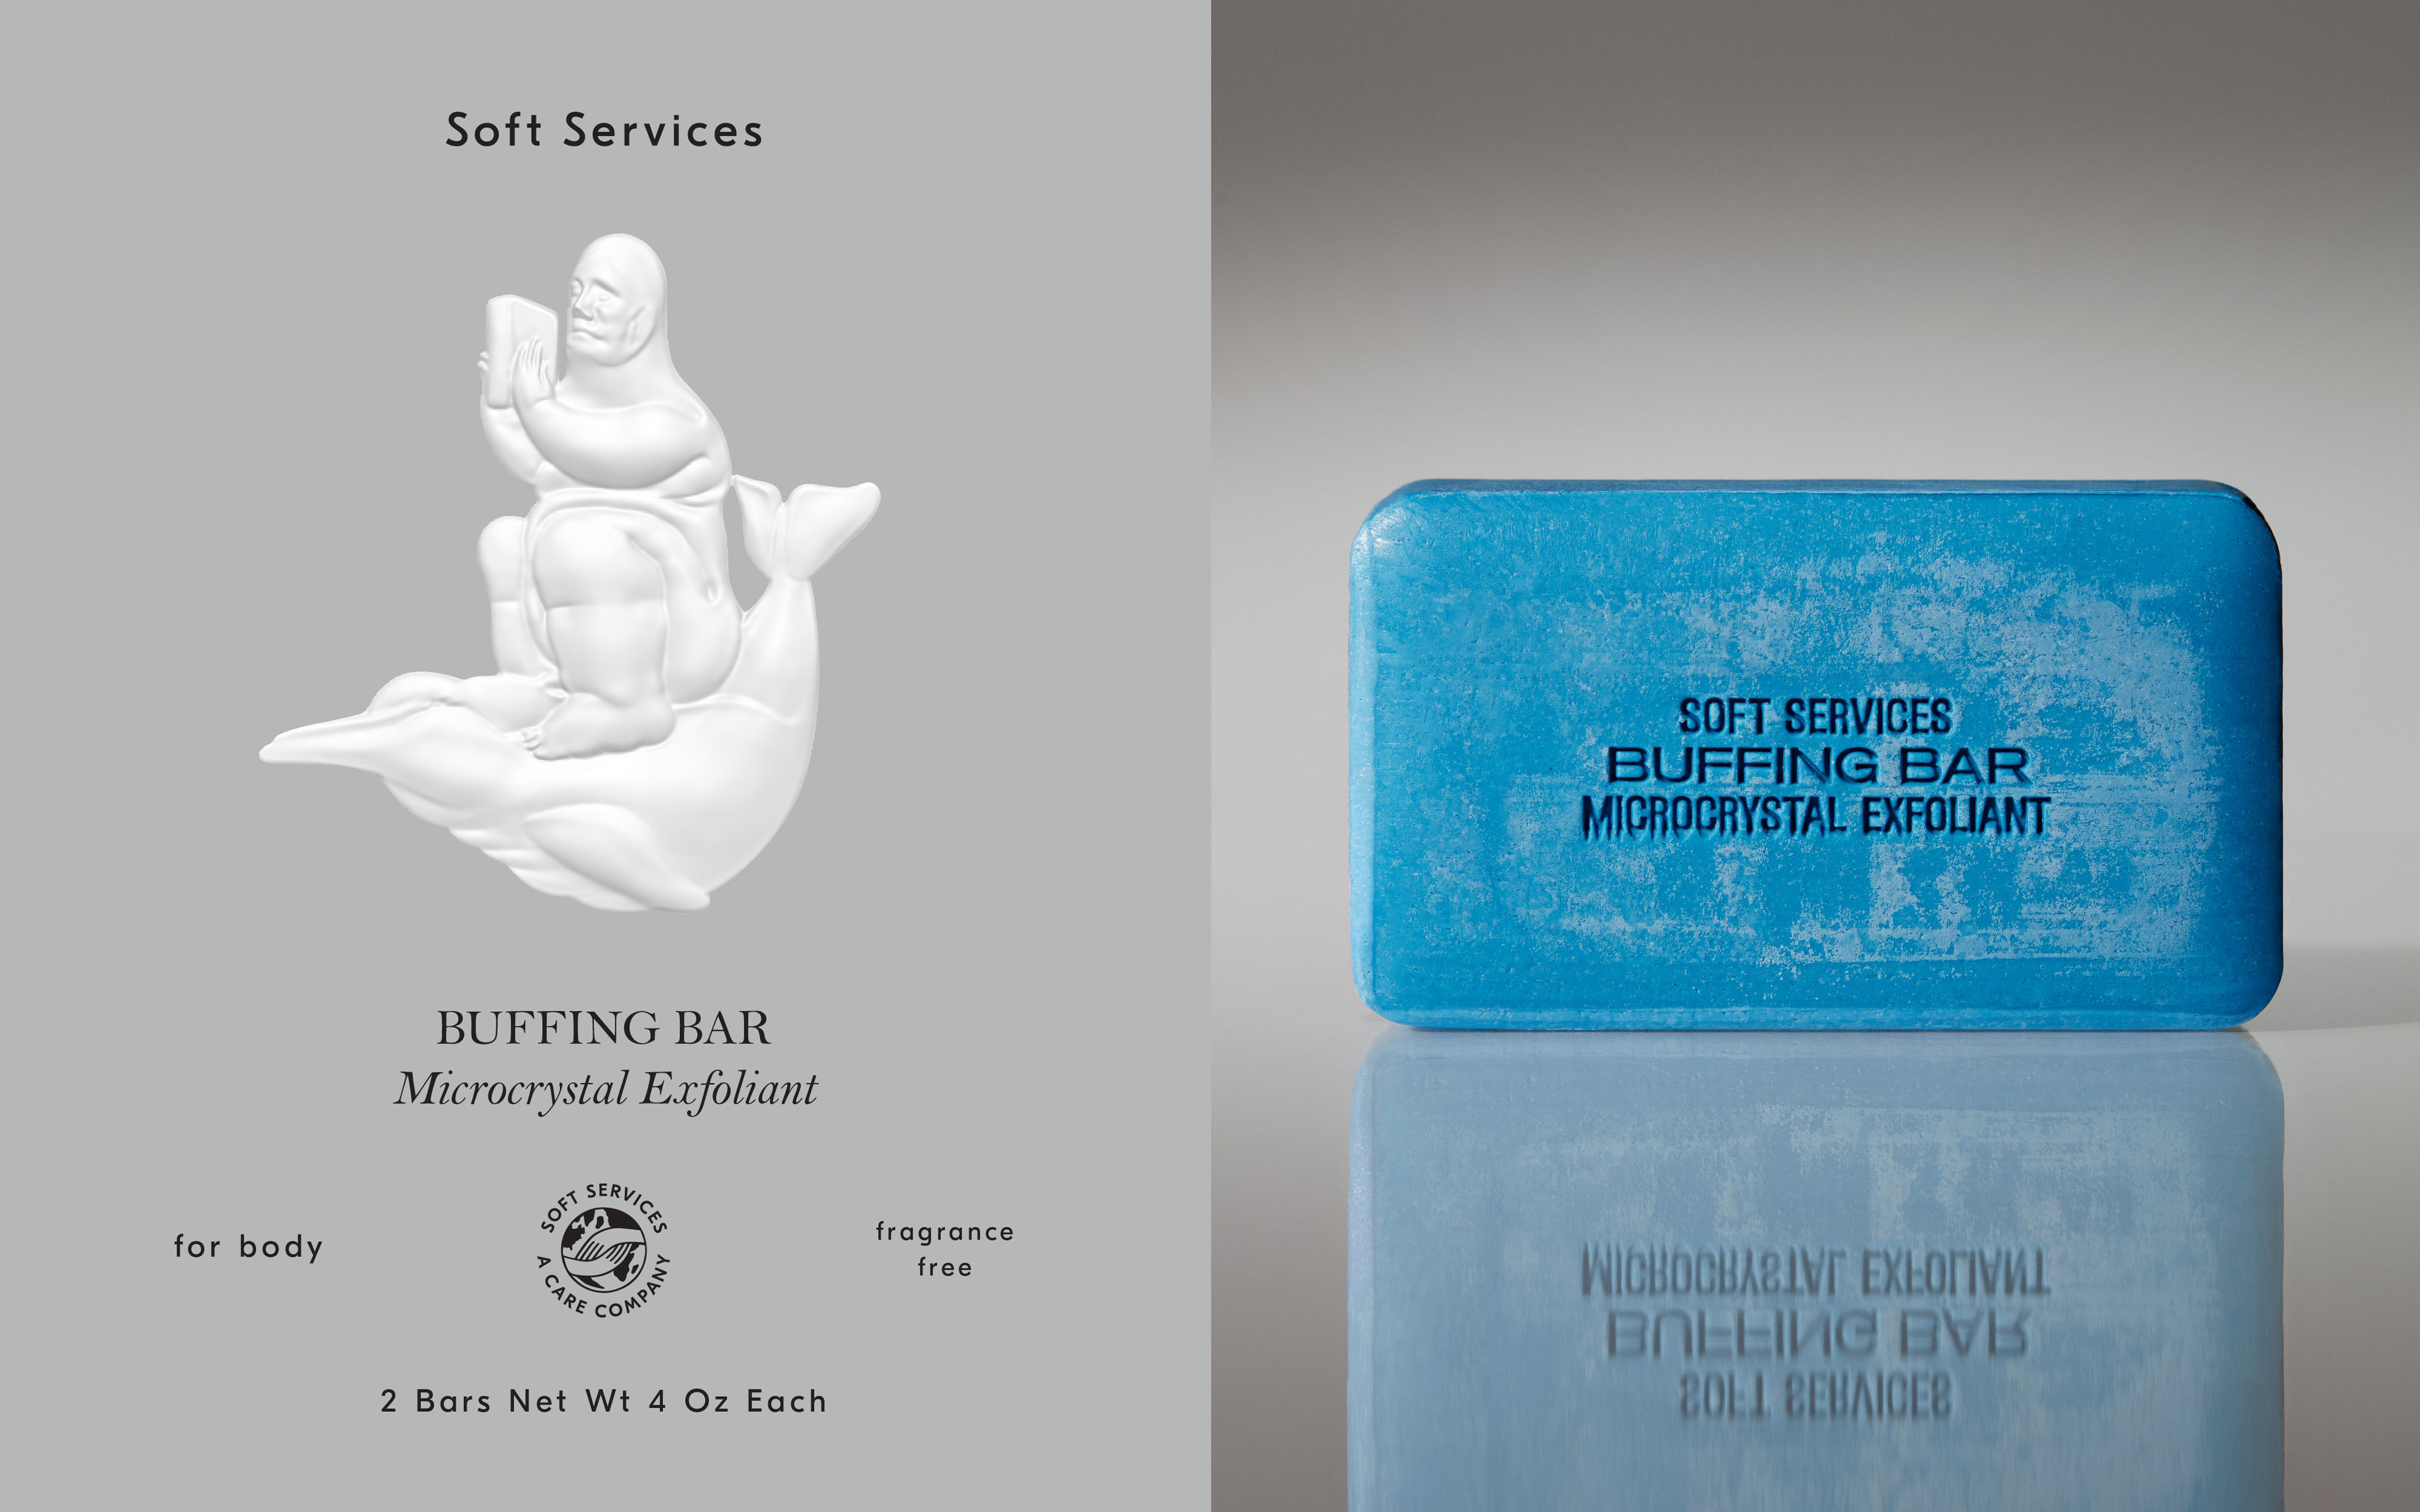 Sculpted emboss and packaging design by Decade for New York skincare brand Soft Services